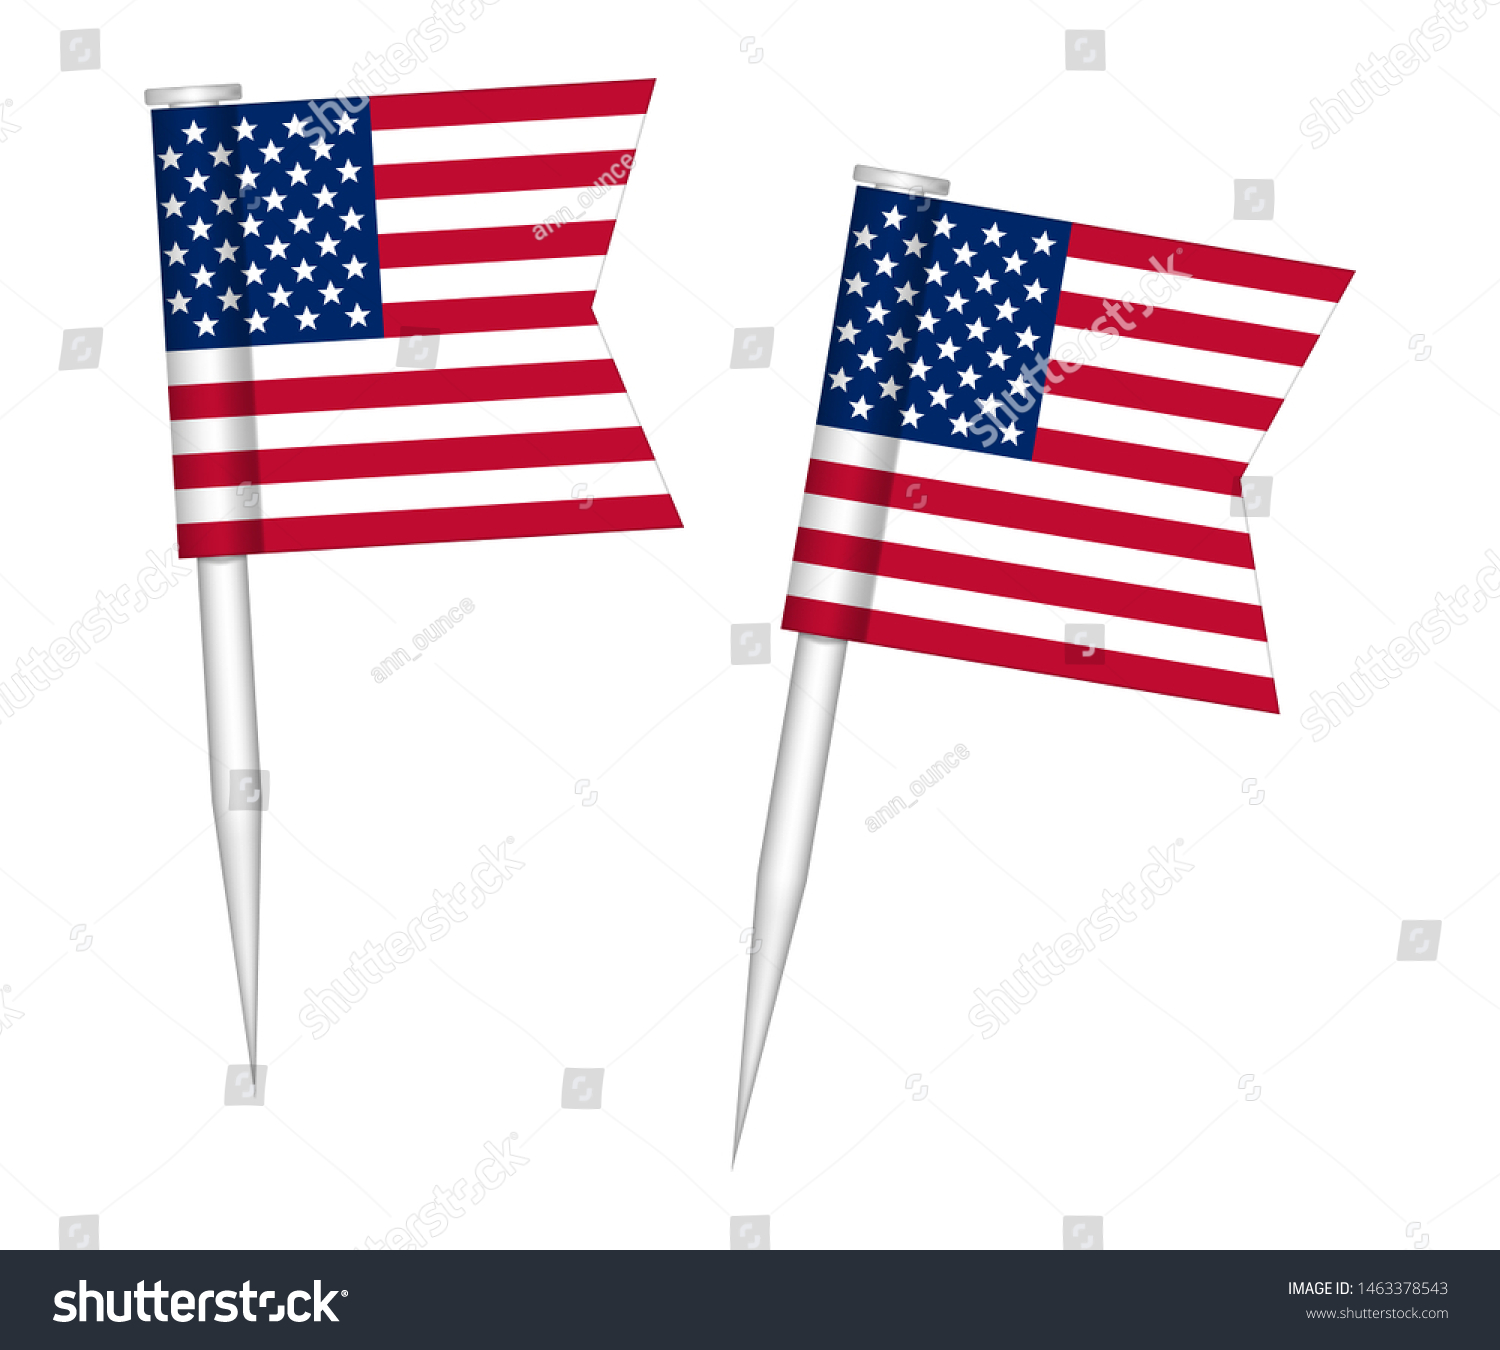 SVG of US flag push pins, vector illustration. Mini stick small pushpin American flags isolated on white background. svg